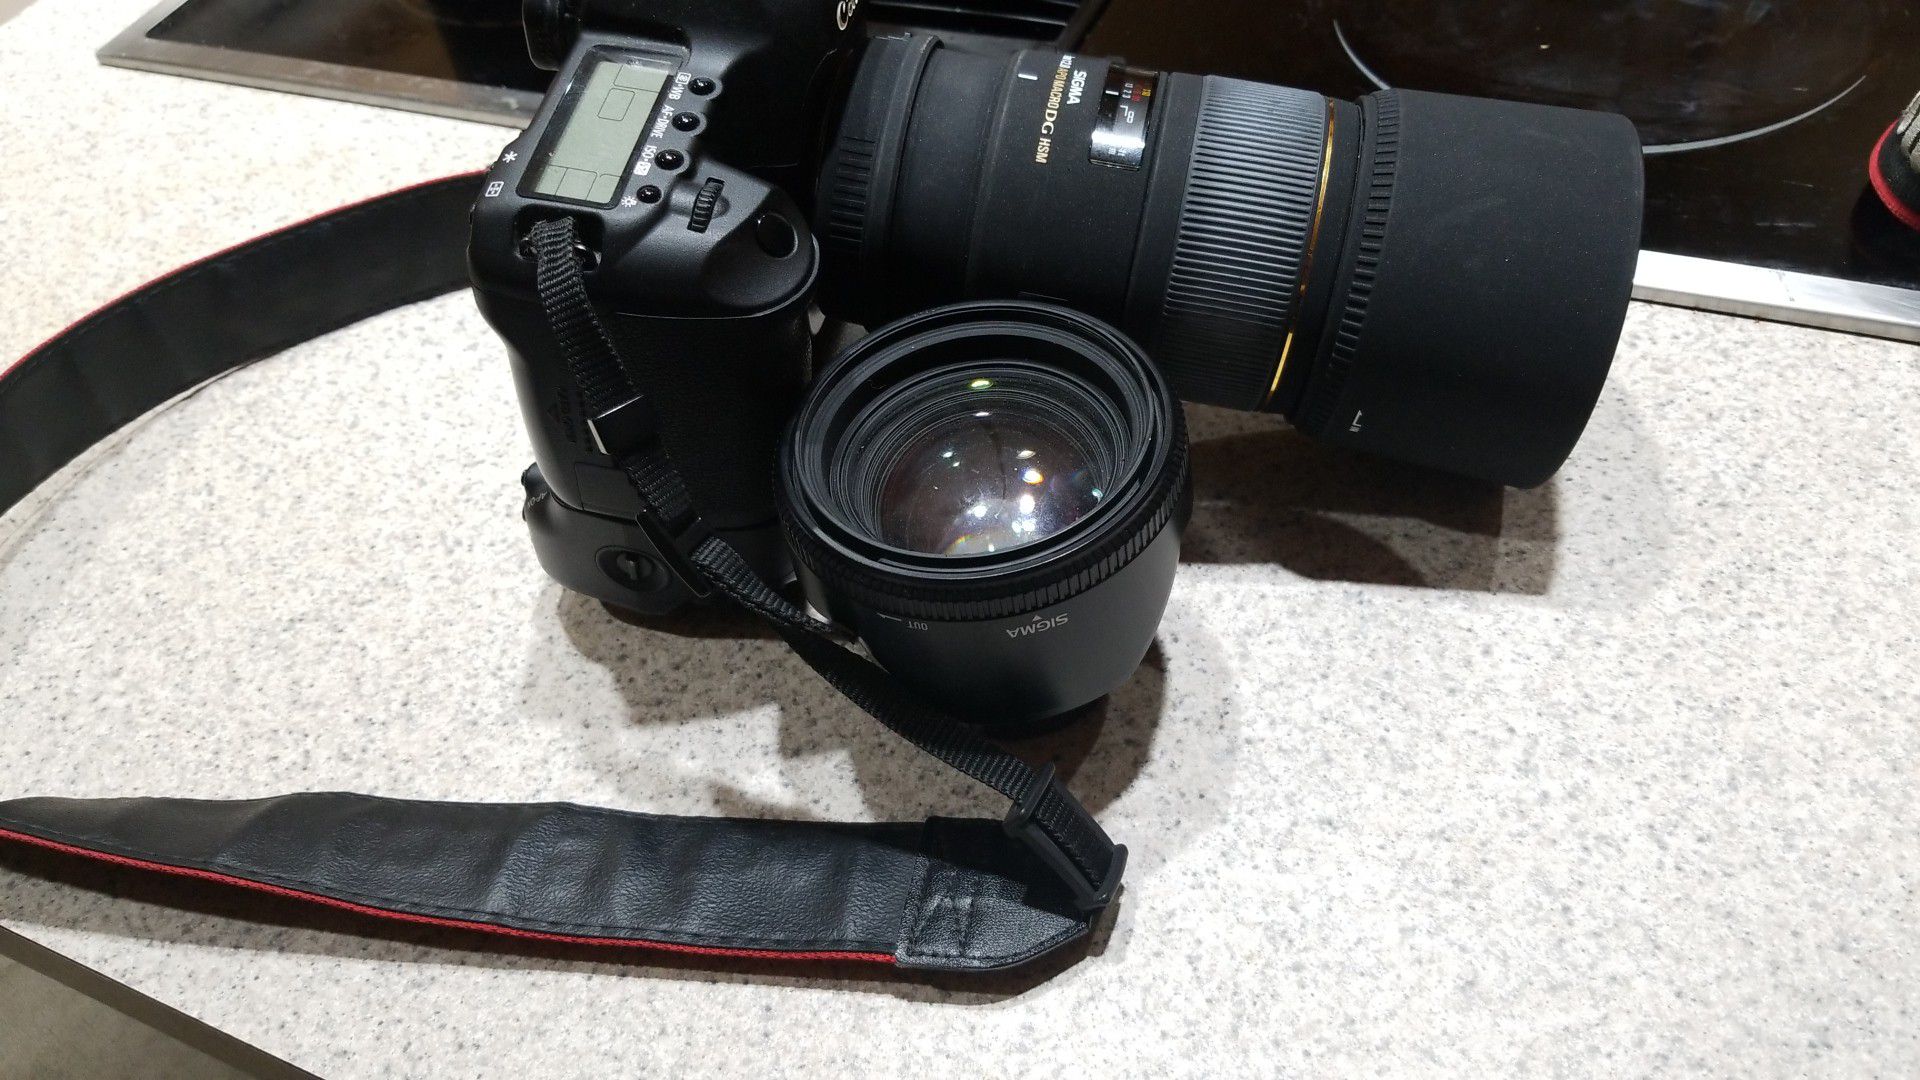 Canon 5D MKII with 150mm macro lens and 50mm